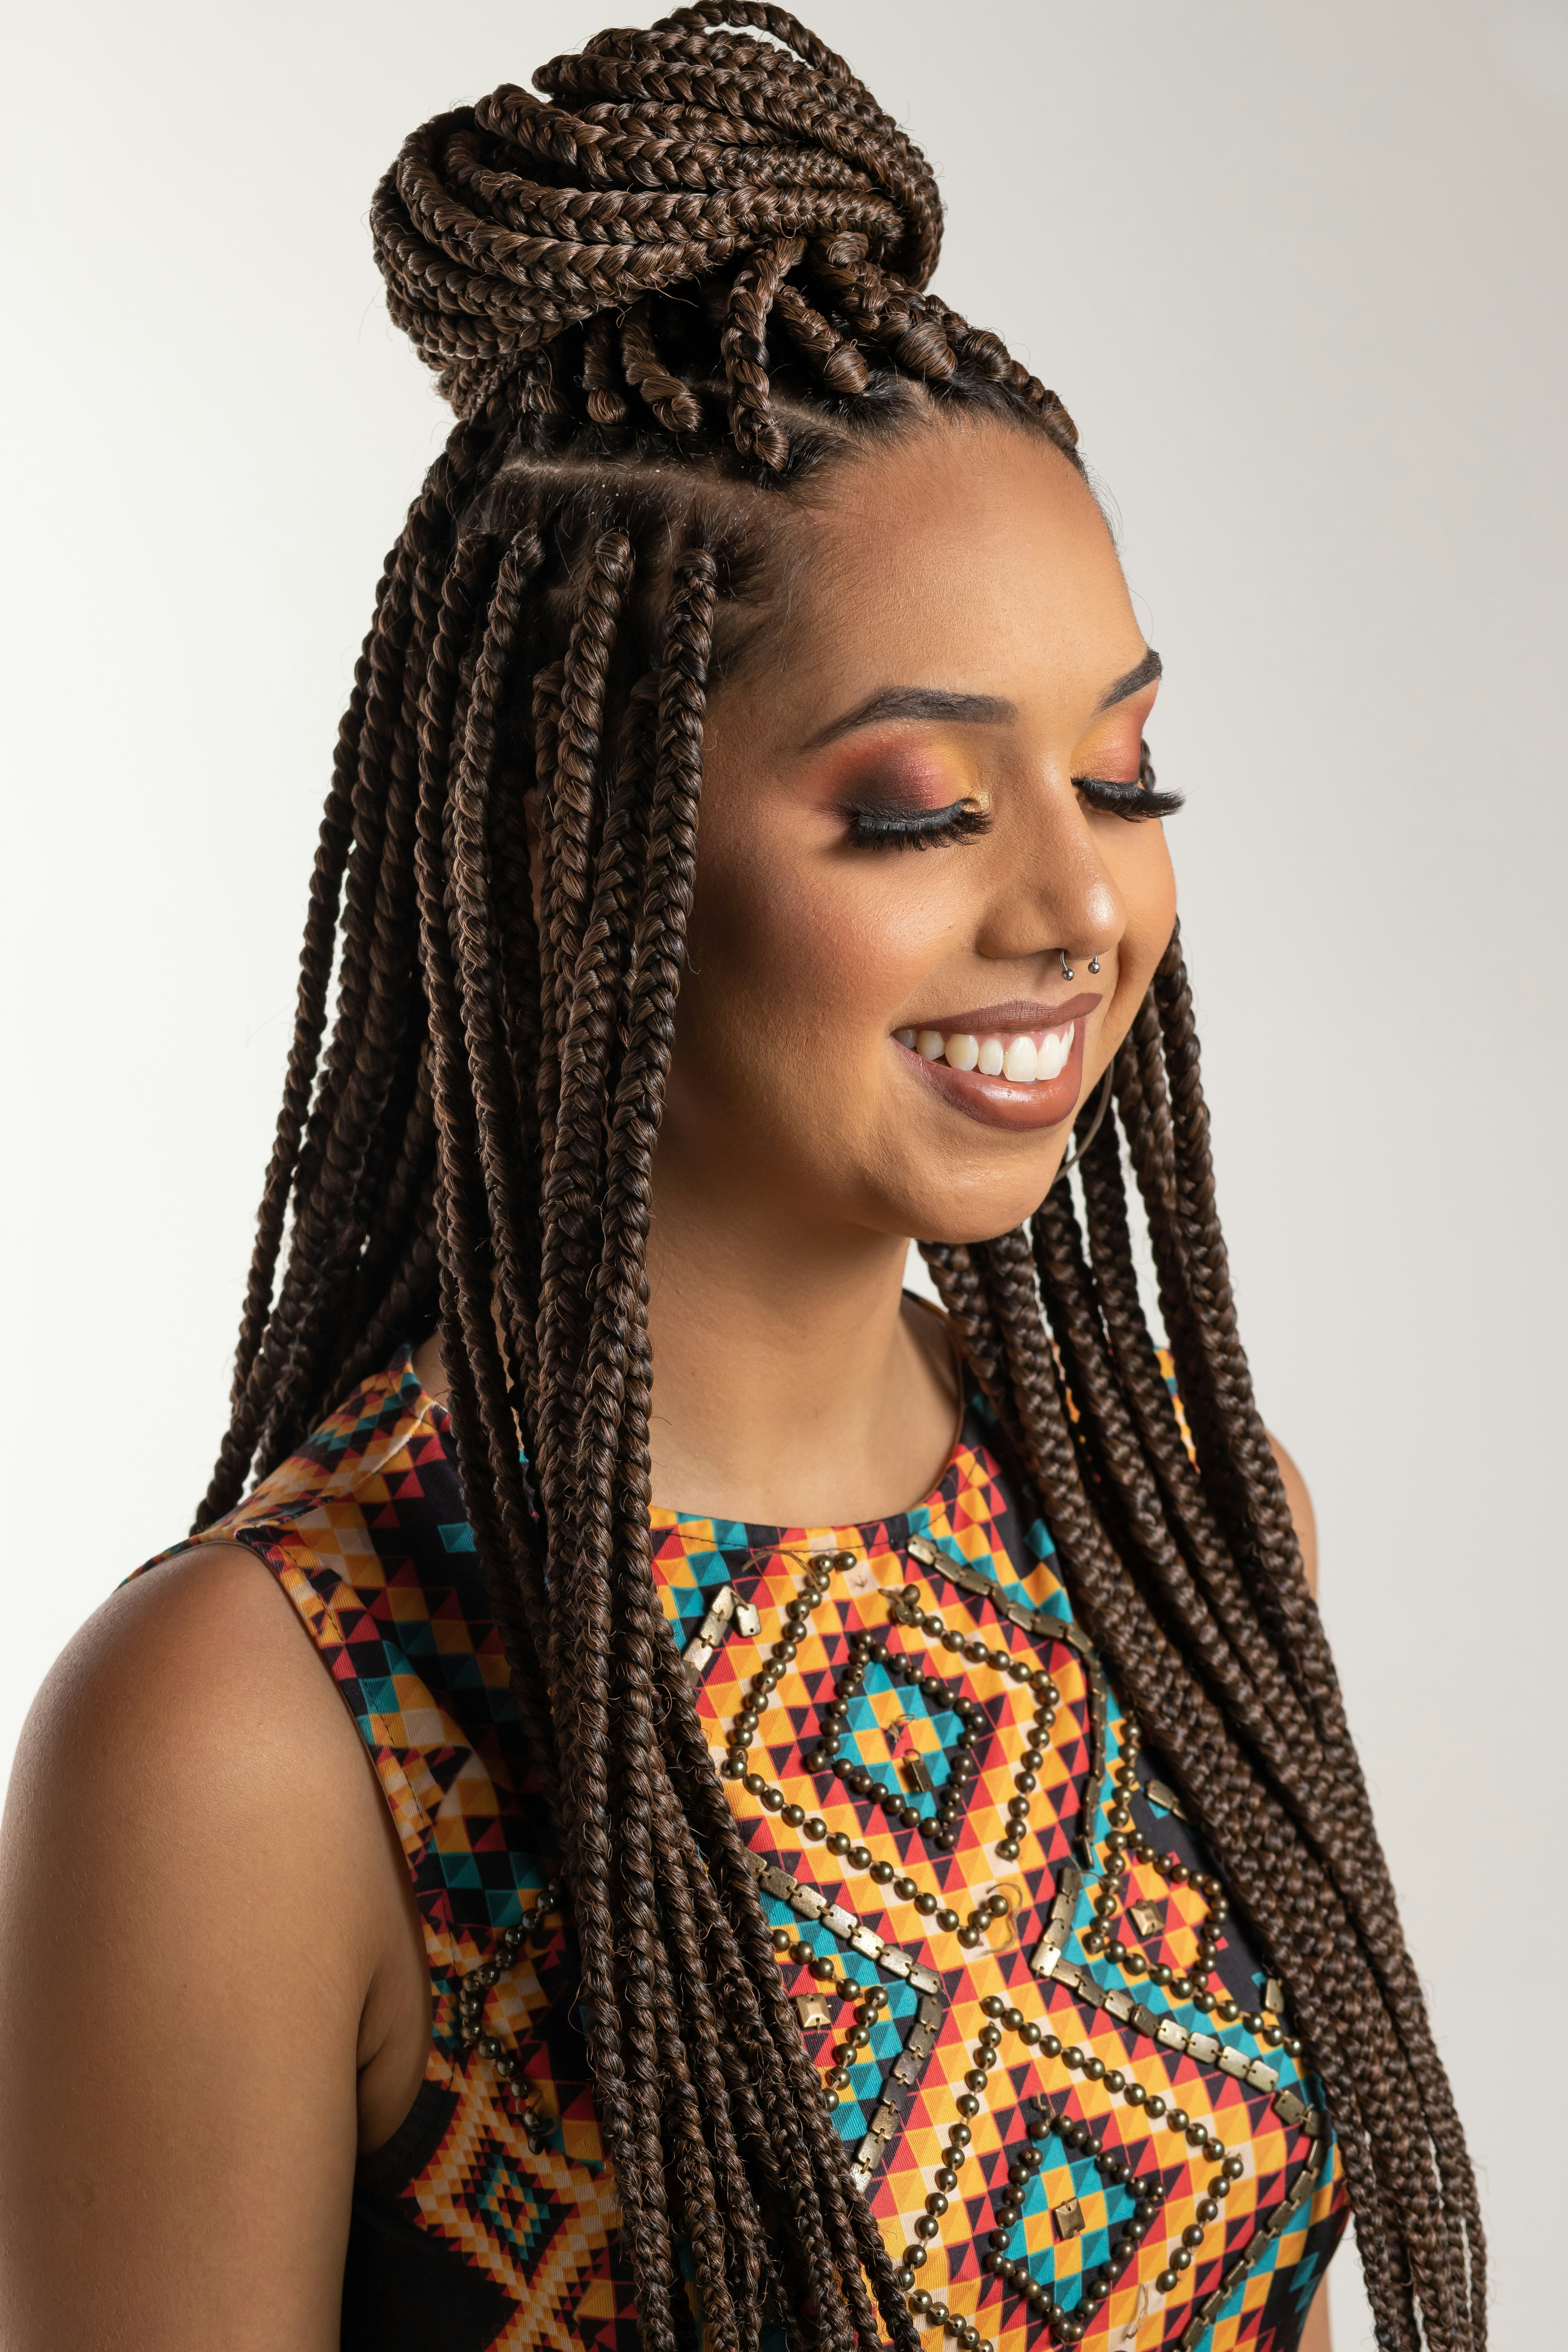 9 Easy Braided Hairstyles That Make a Stylish Statement –